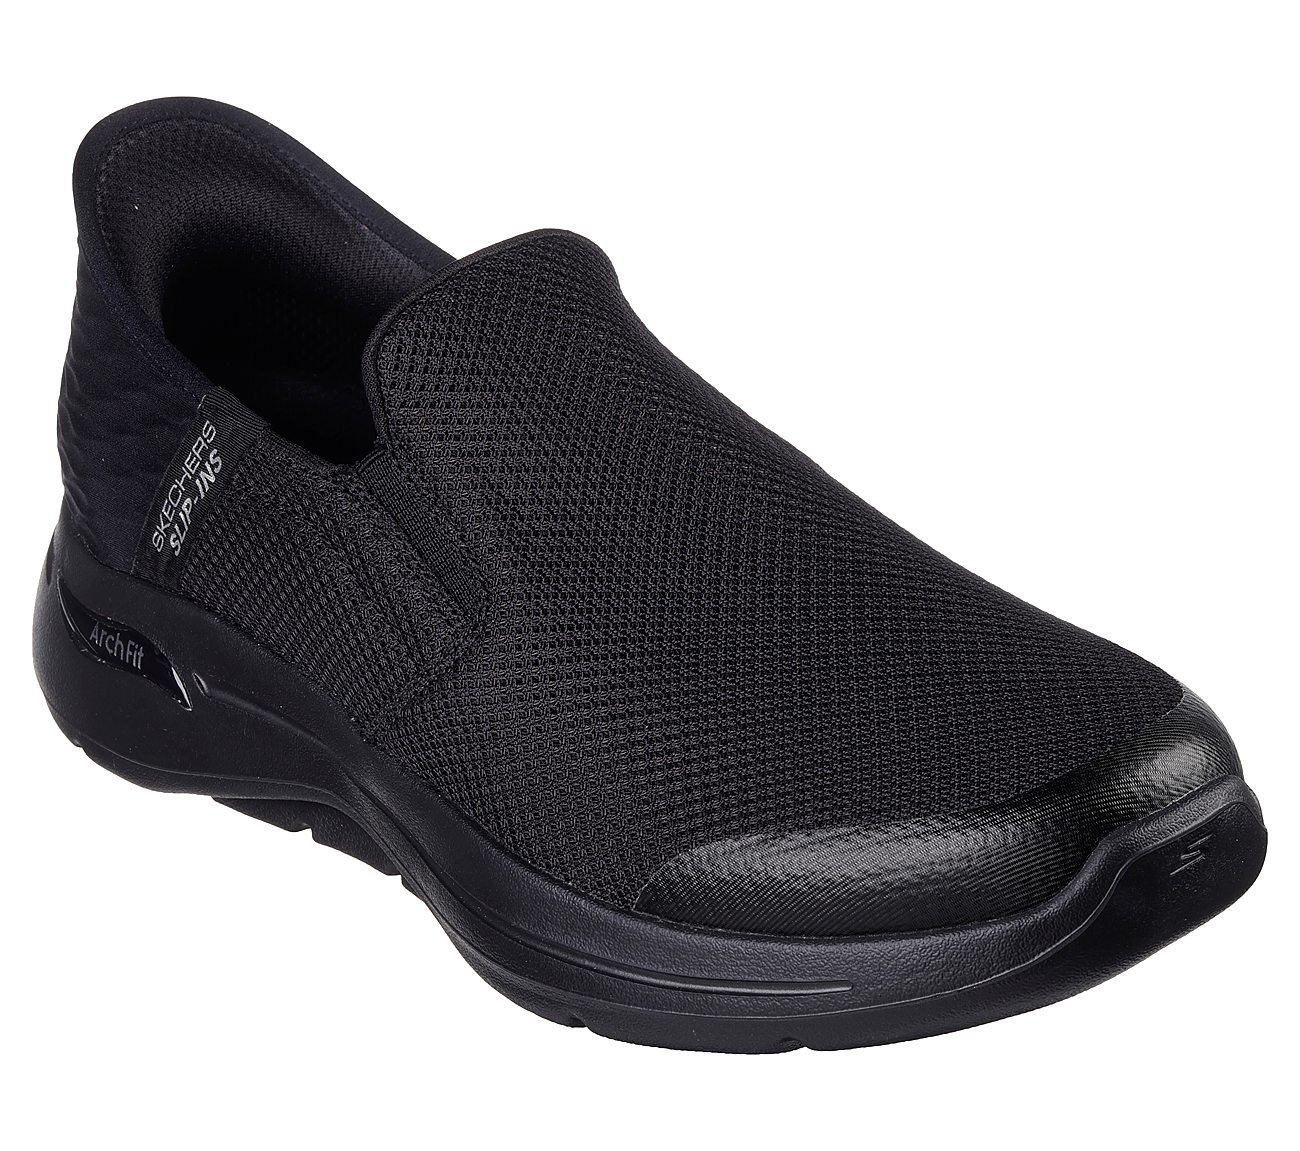 GO WALK ARCH FIT - HANDS FREE, BBLACK Footwear Right View